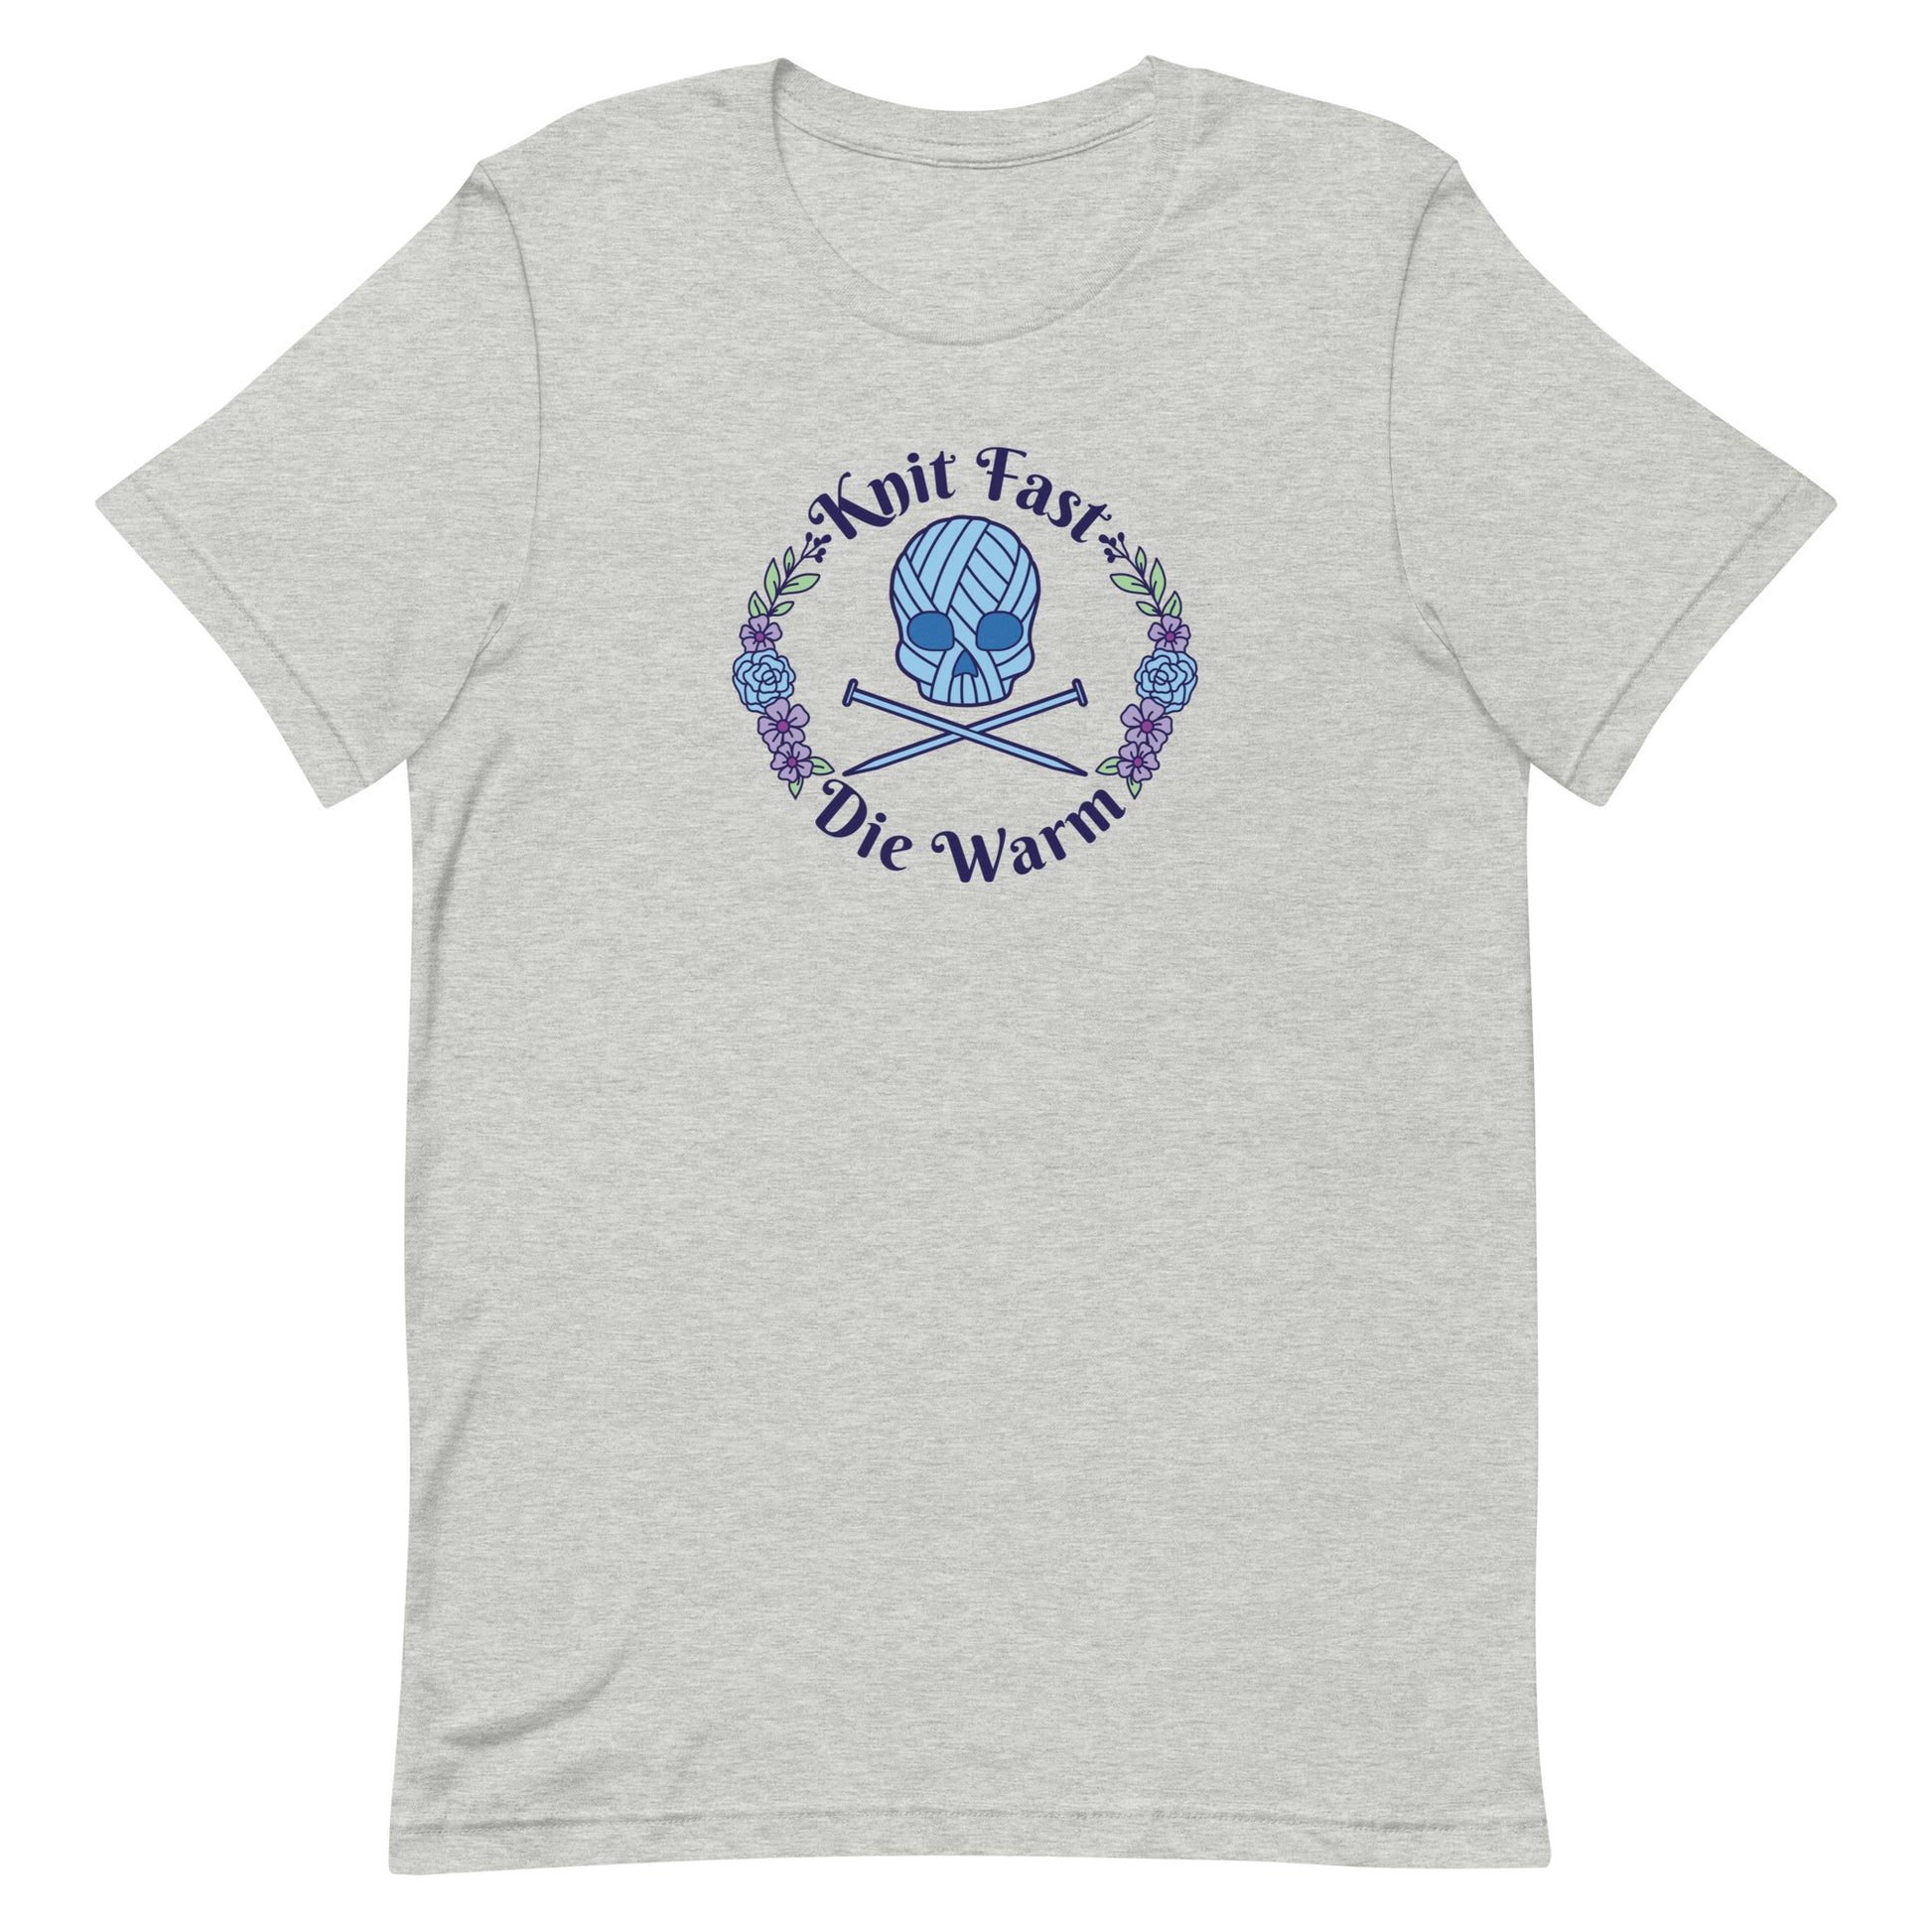 A heather grey crewneck t-shirt featuring an image of a skull and crossbones made of yarn and knitting needles. A floral wreath surrounds the skull, along with words that read "Knit Fast, Die Warm"